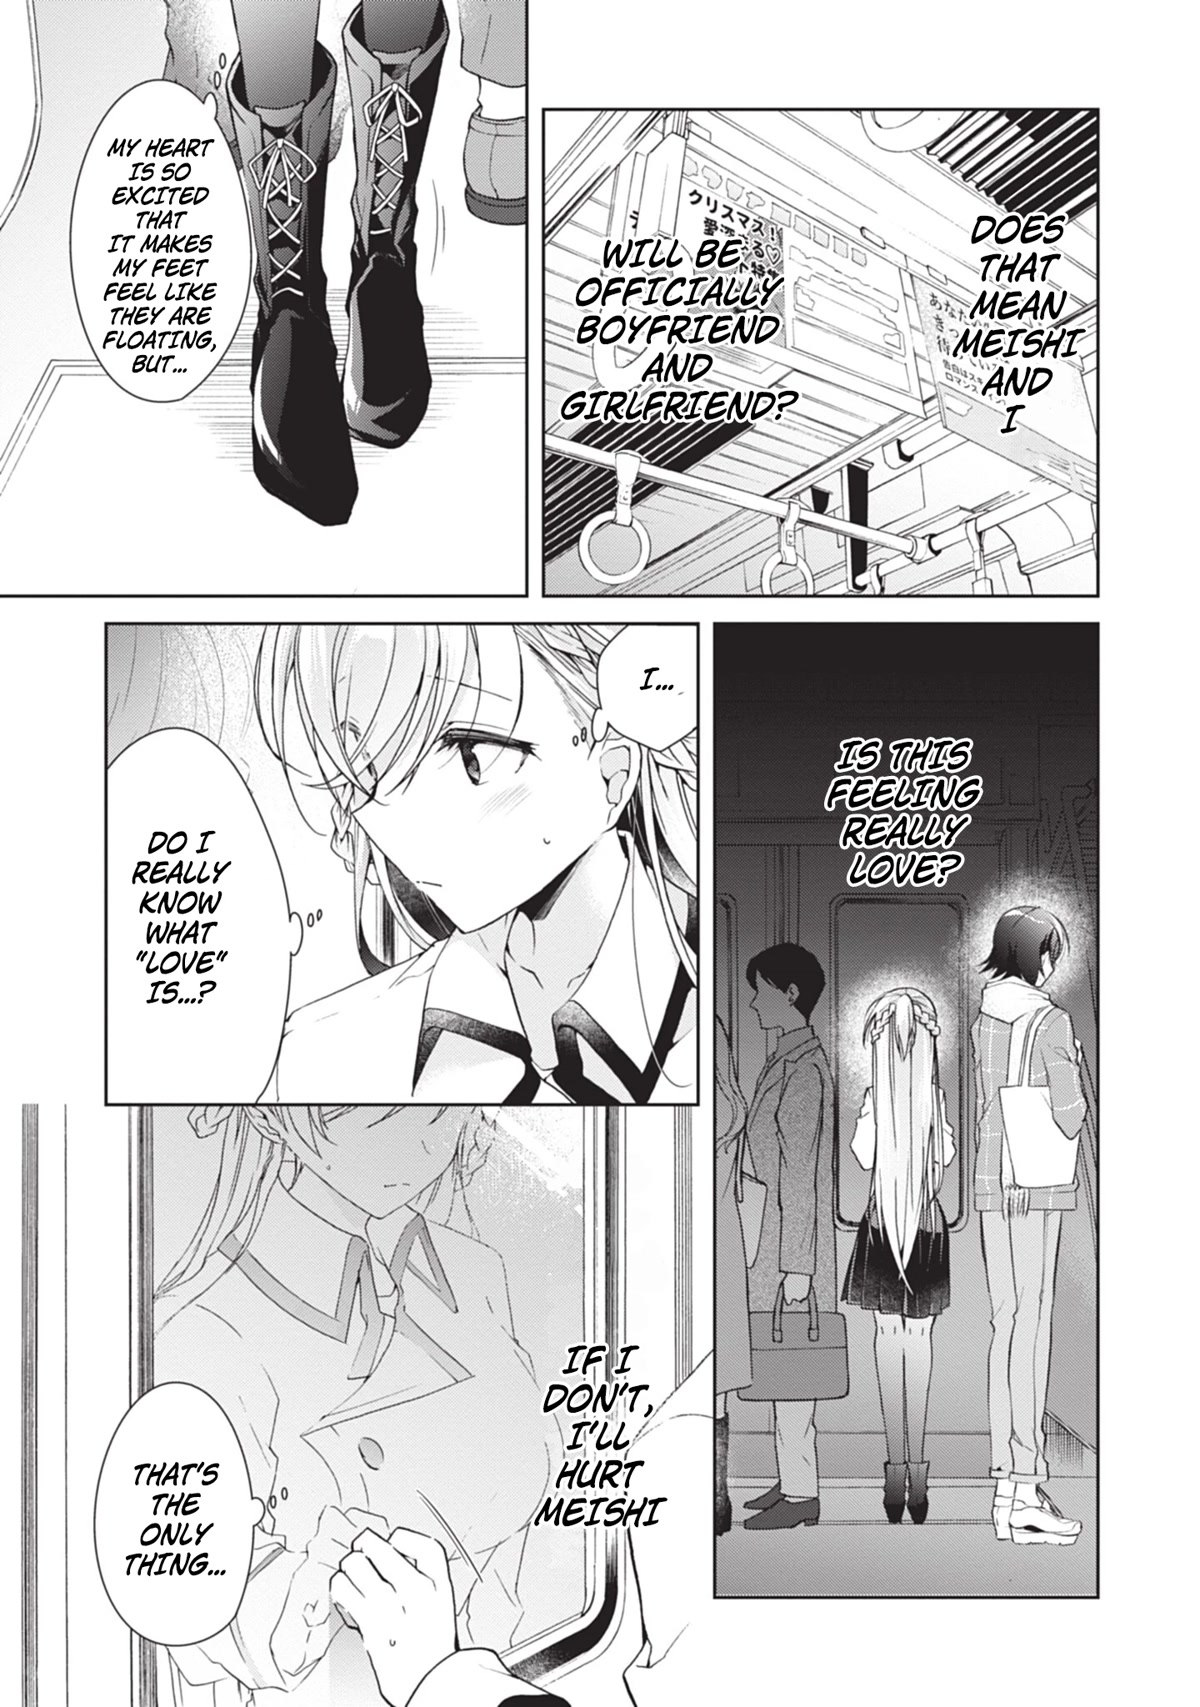 Isshiki-san Wants to Know About Love. - chapter 17 - #5